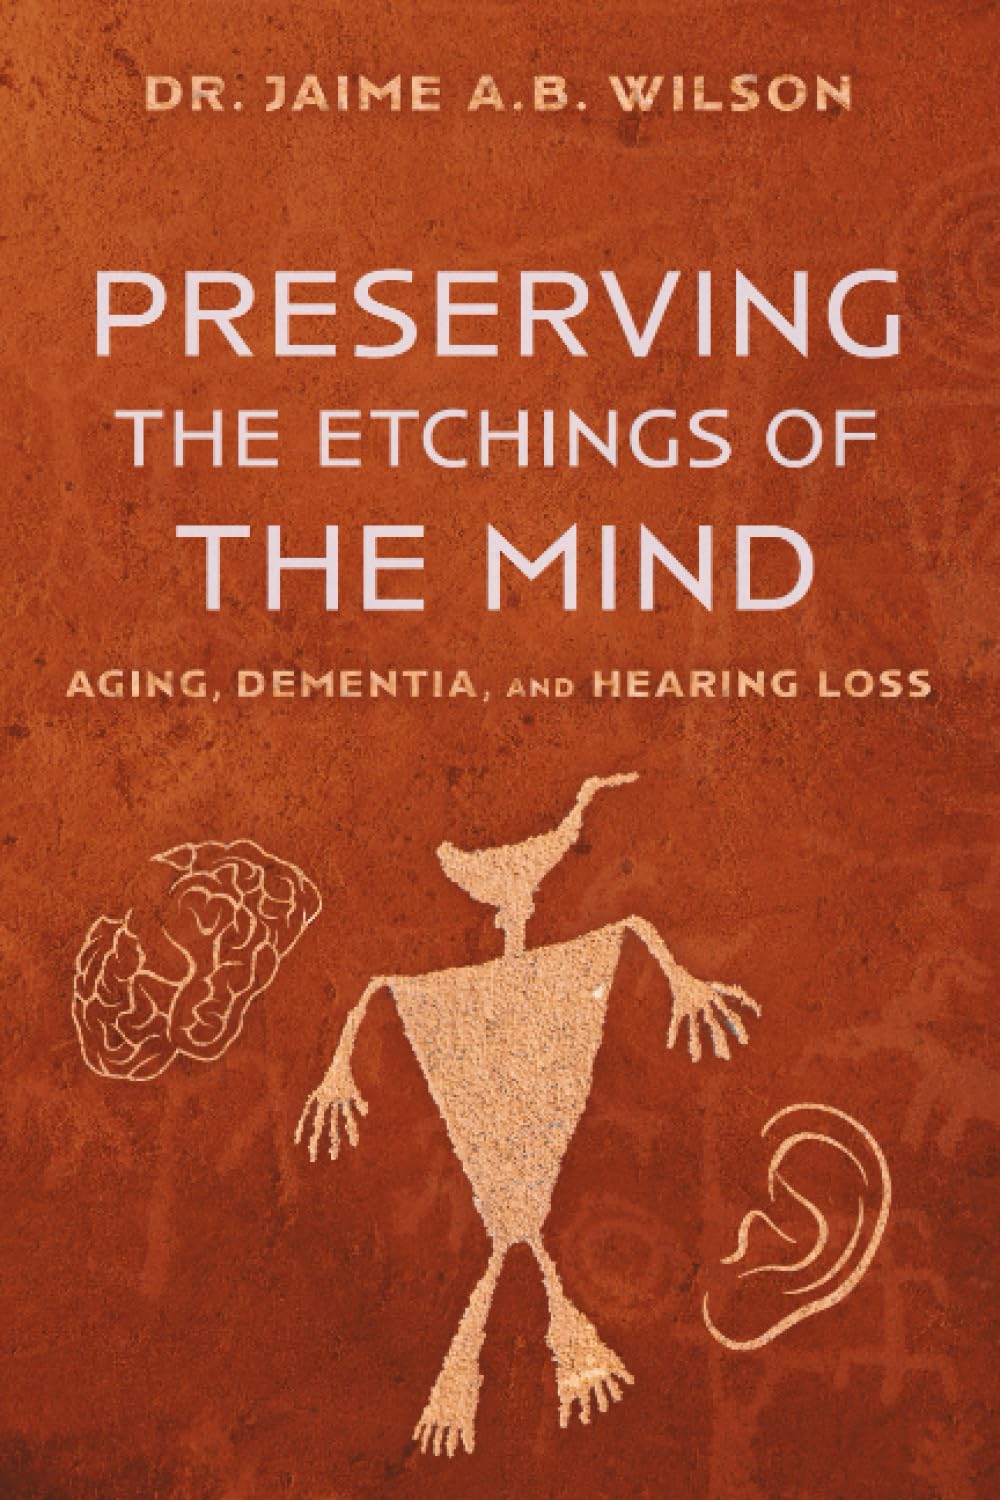 PRESERVING THE ETCHINGS OF THE MIND